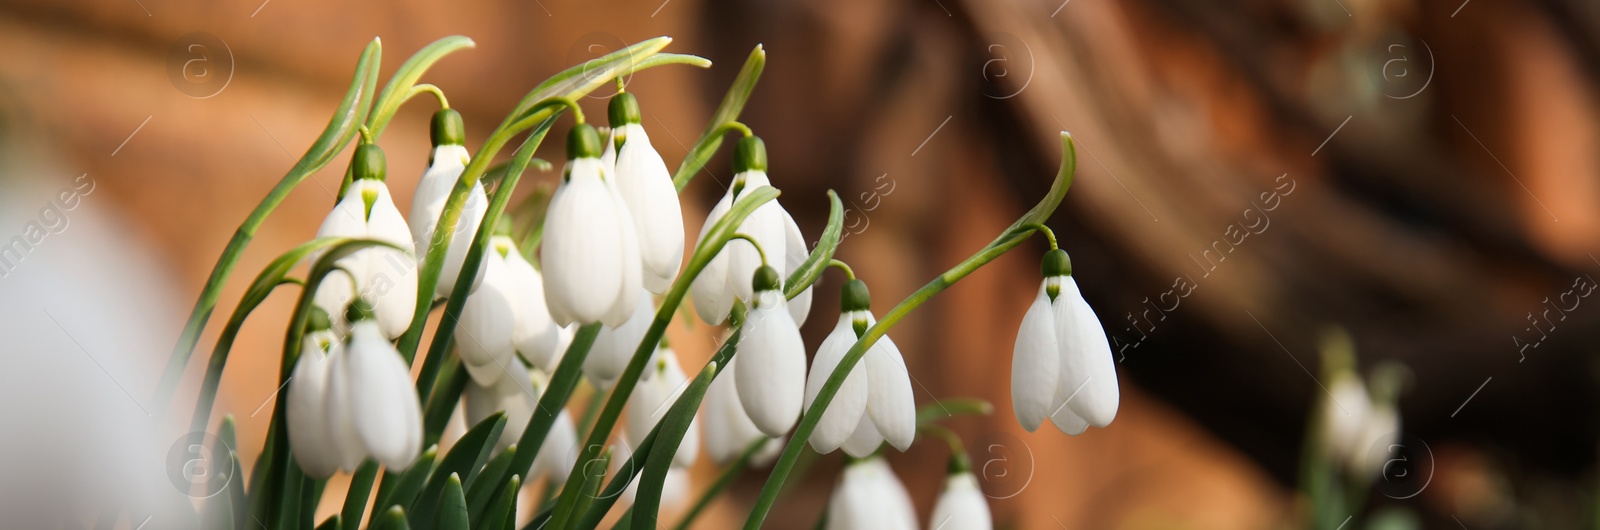 Image of Beautiful snowdrops growing outdoors, banner design. First spring flowers